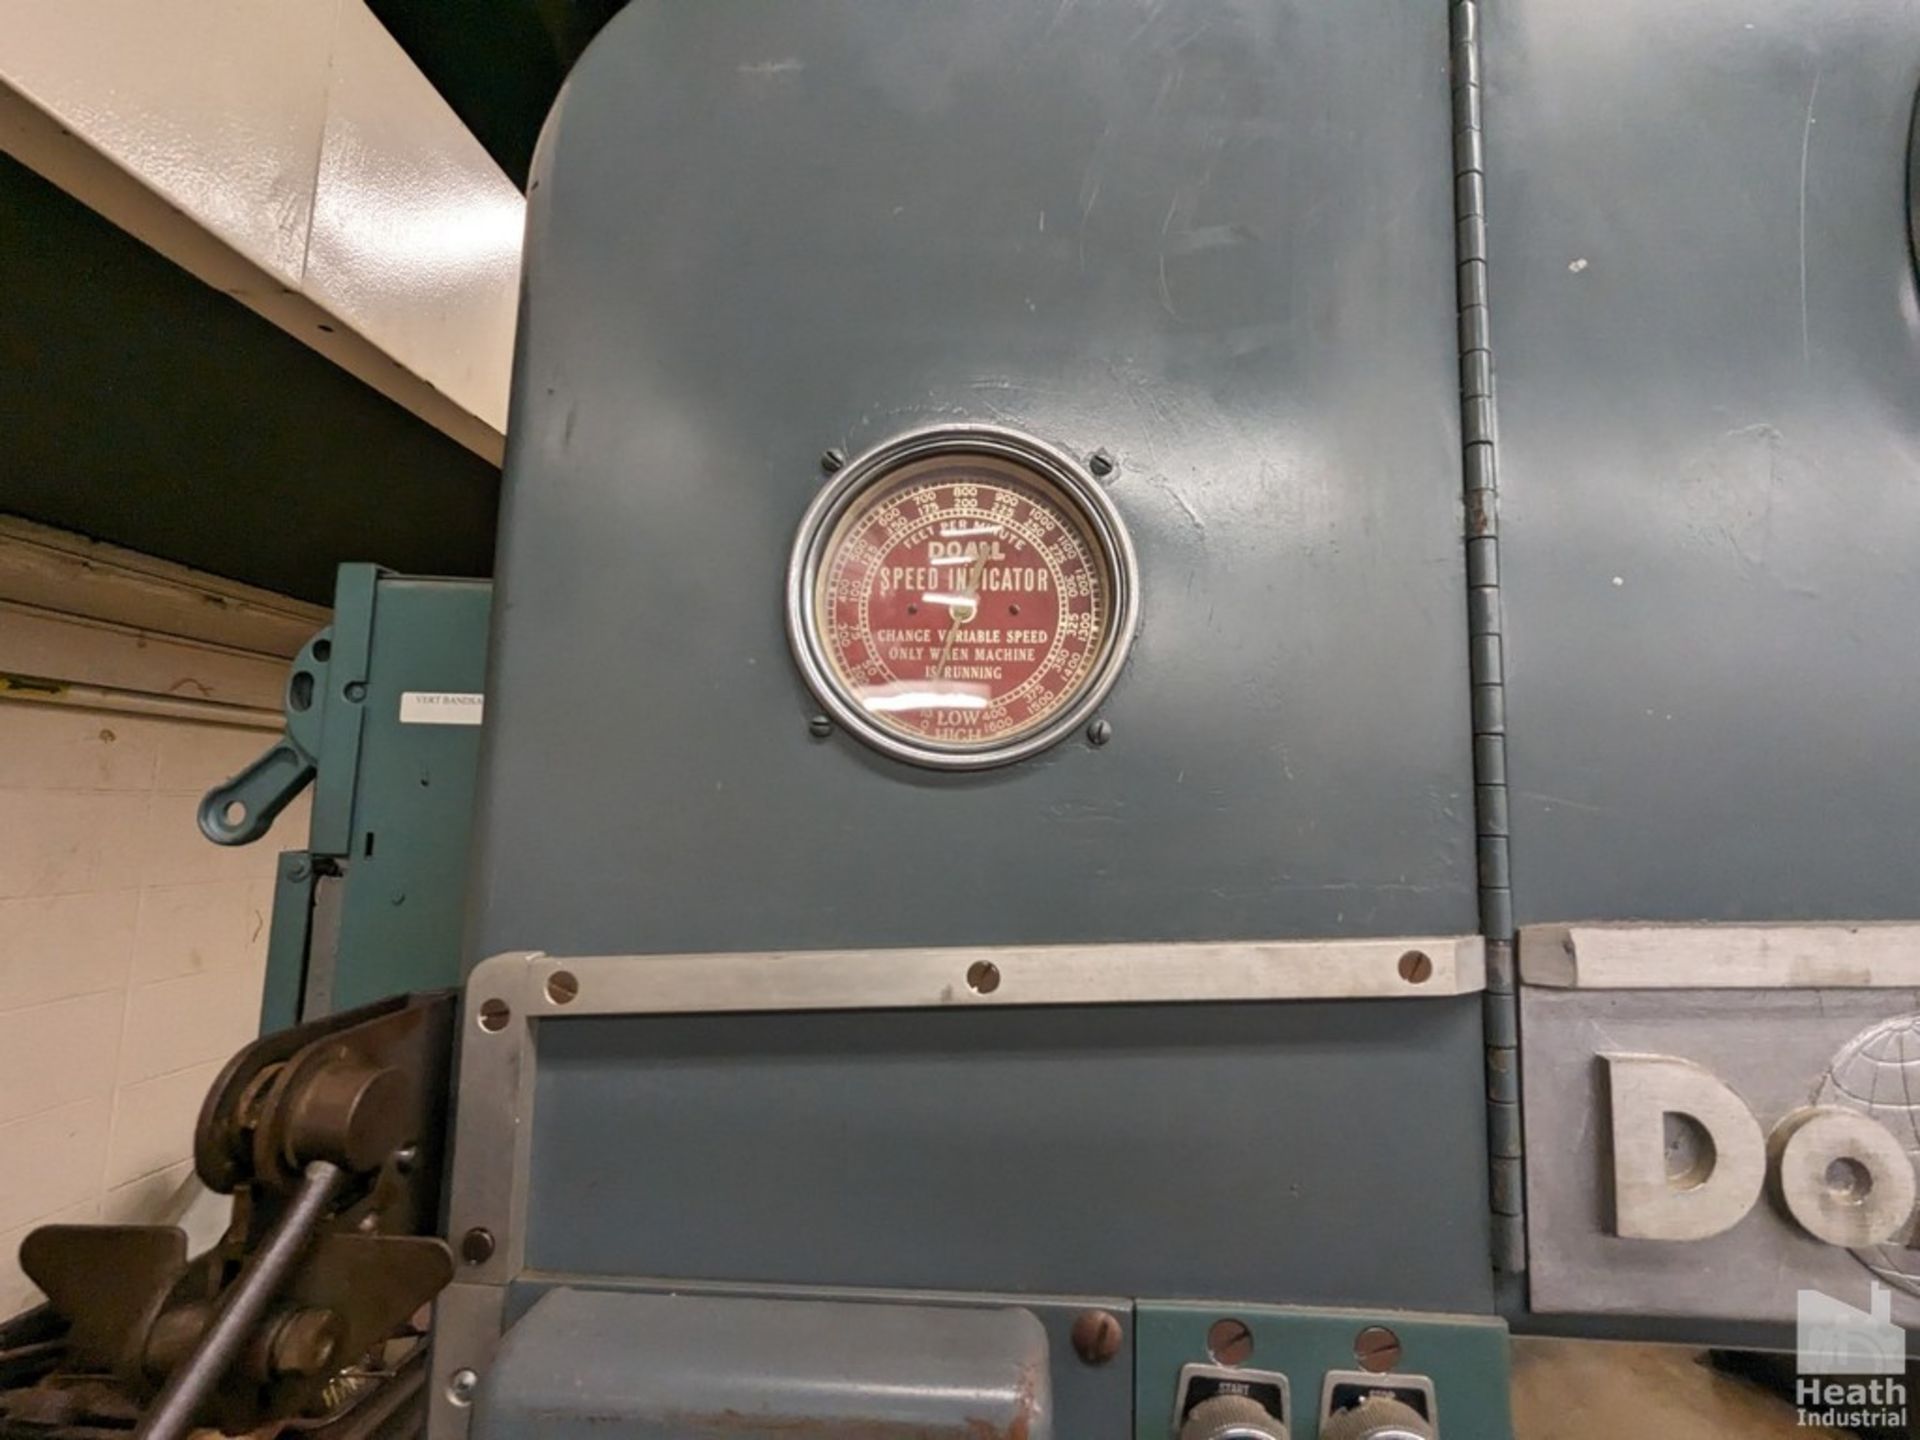 DOALL 16" MODEL 16-2 VERTICAL BAND SAW, S/N 45-55633 WITH BLADE WELDER Loading Fee :$150 - Image 3 of 8